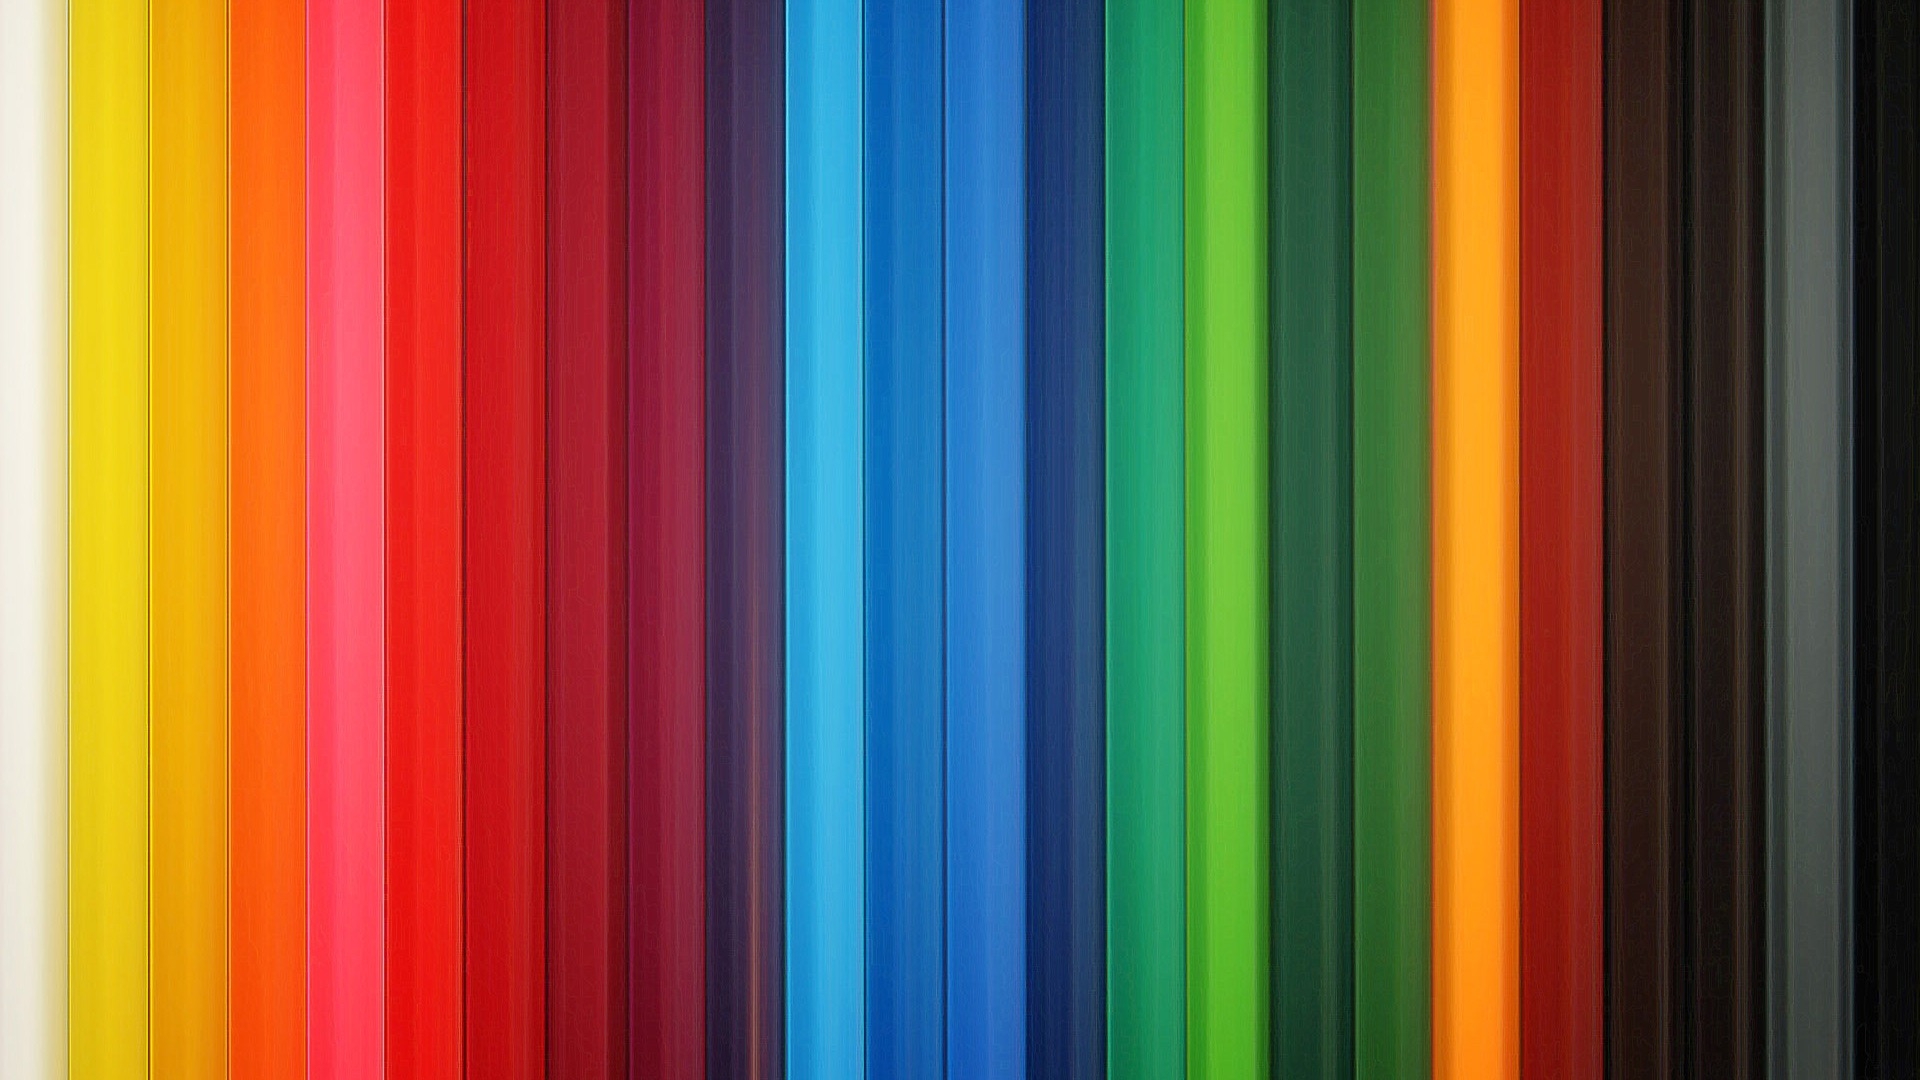 Wallpaper Colorful Stripes Rainbow Vertical